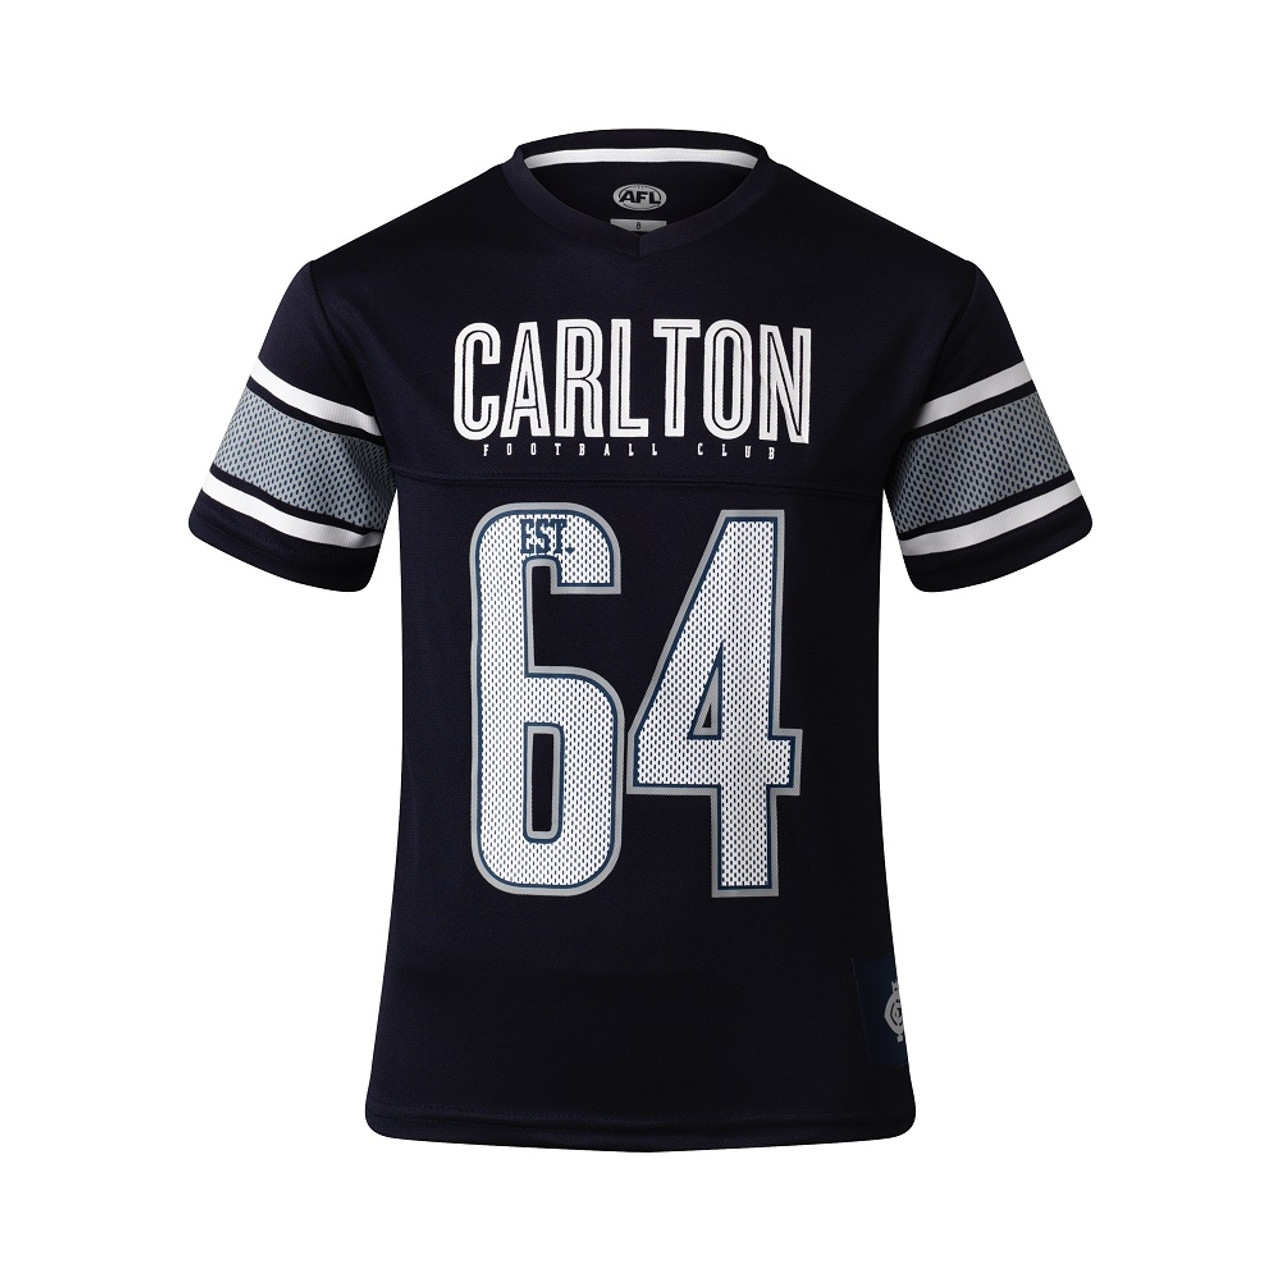 youth football jerseys with numbers